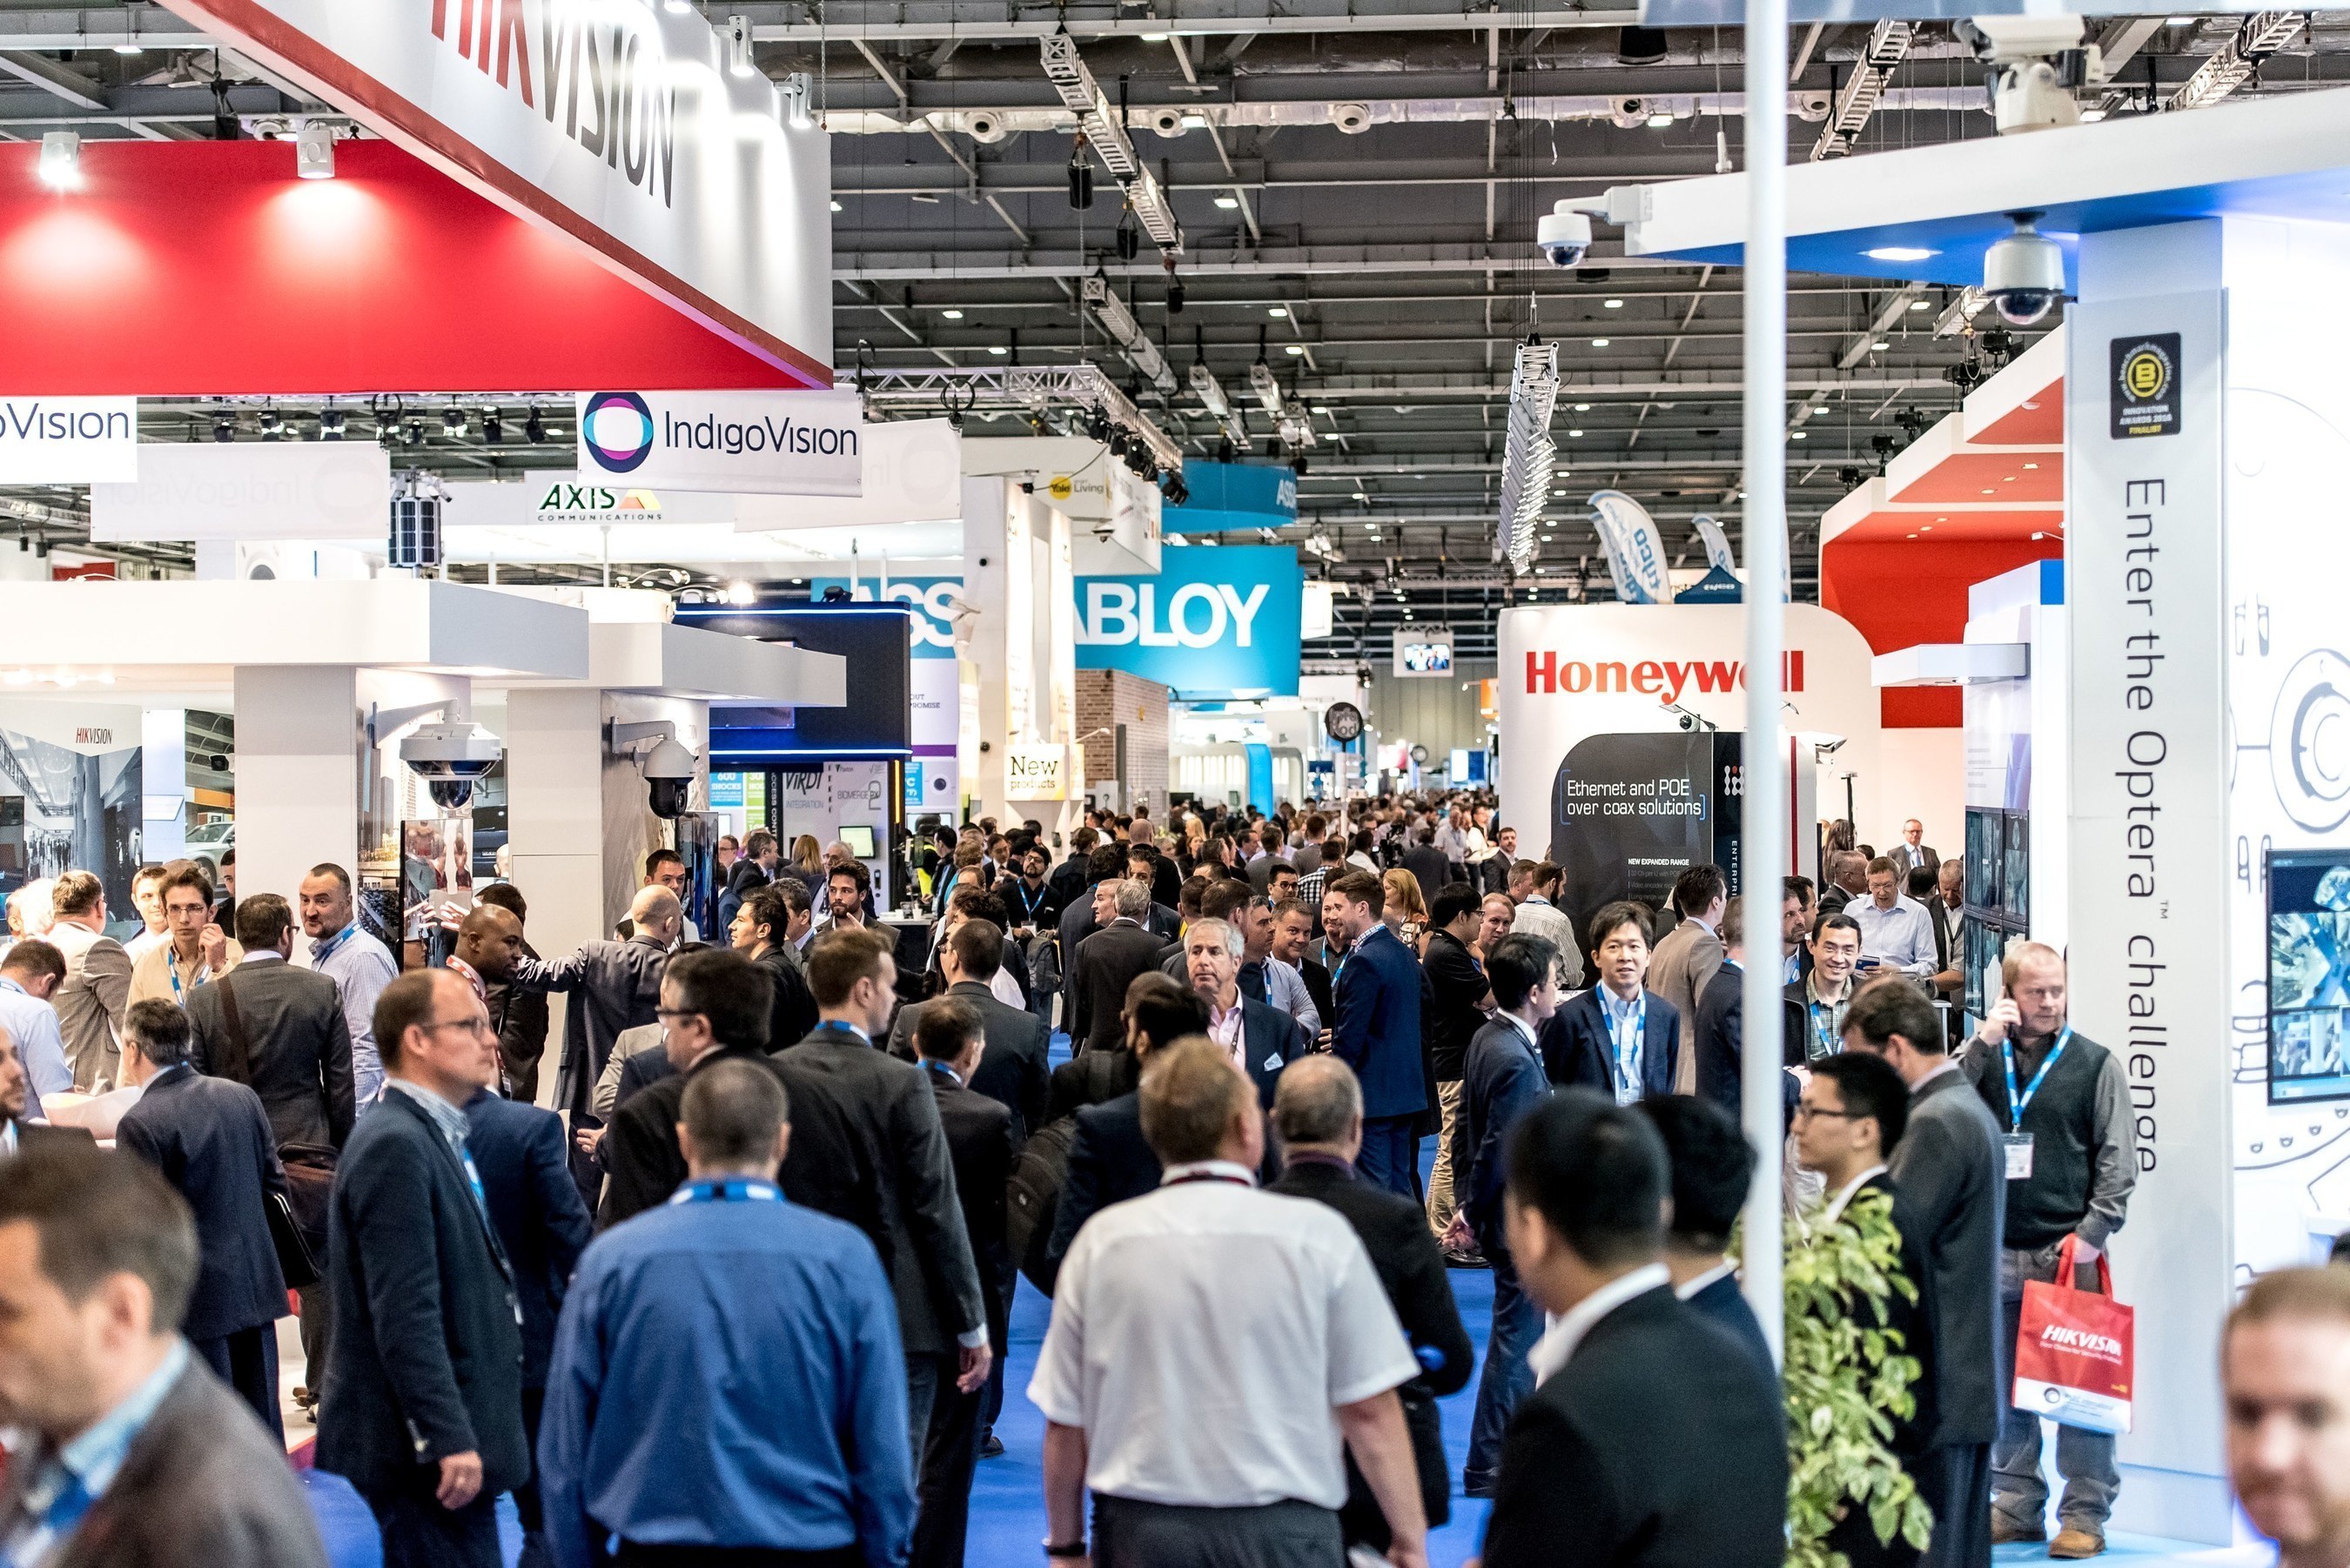 Join your peers at next years' must attend event, IFSEC Borders & Infrastructure 2017 (PRNewsFoto/IFSEC International)